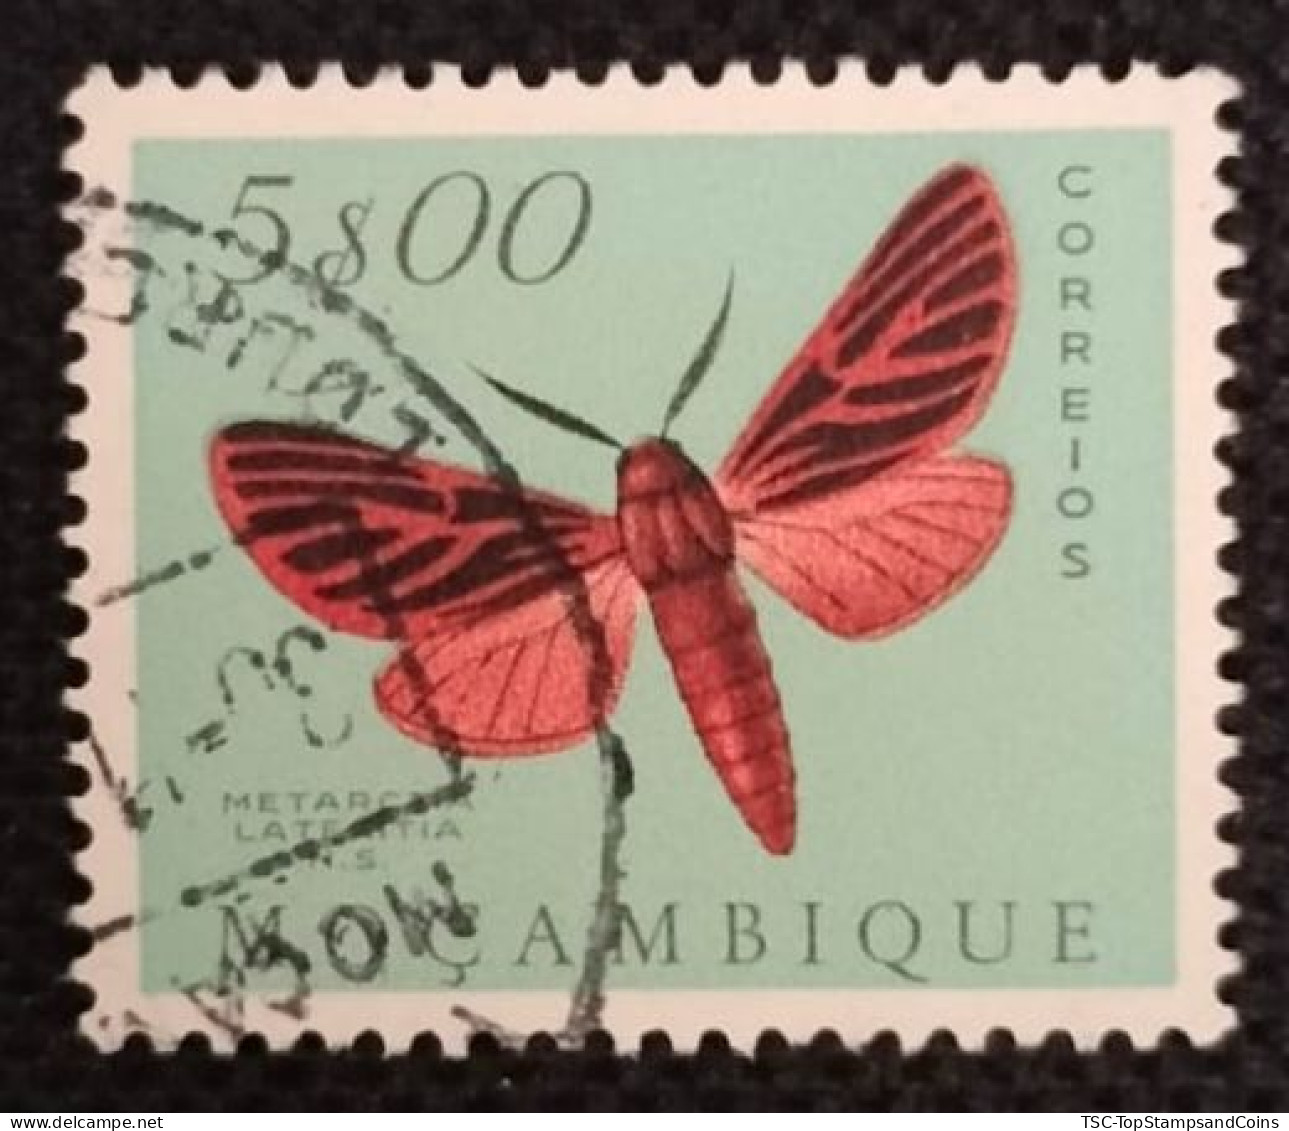 MOZPO0403UC - Mozambique Butterflies  - 5$00 Used Stamp - Mozambique - 1953 - Mosambik